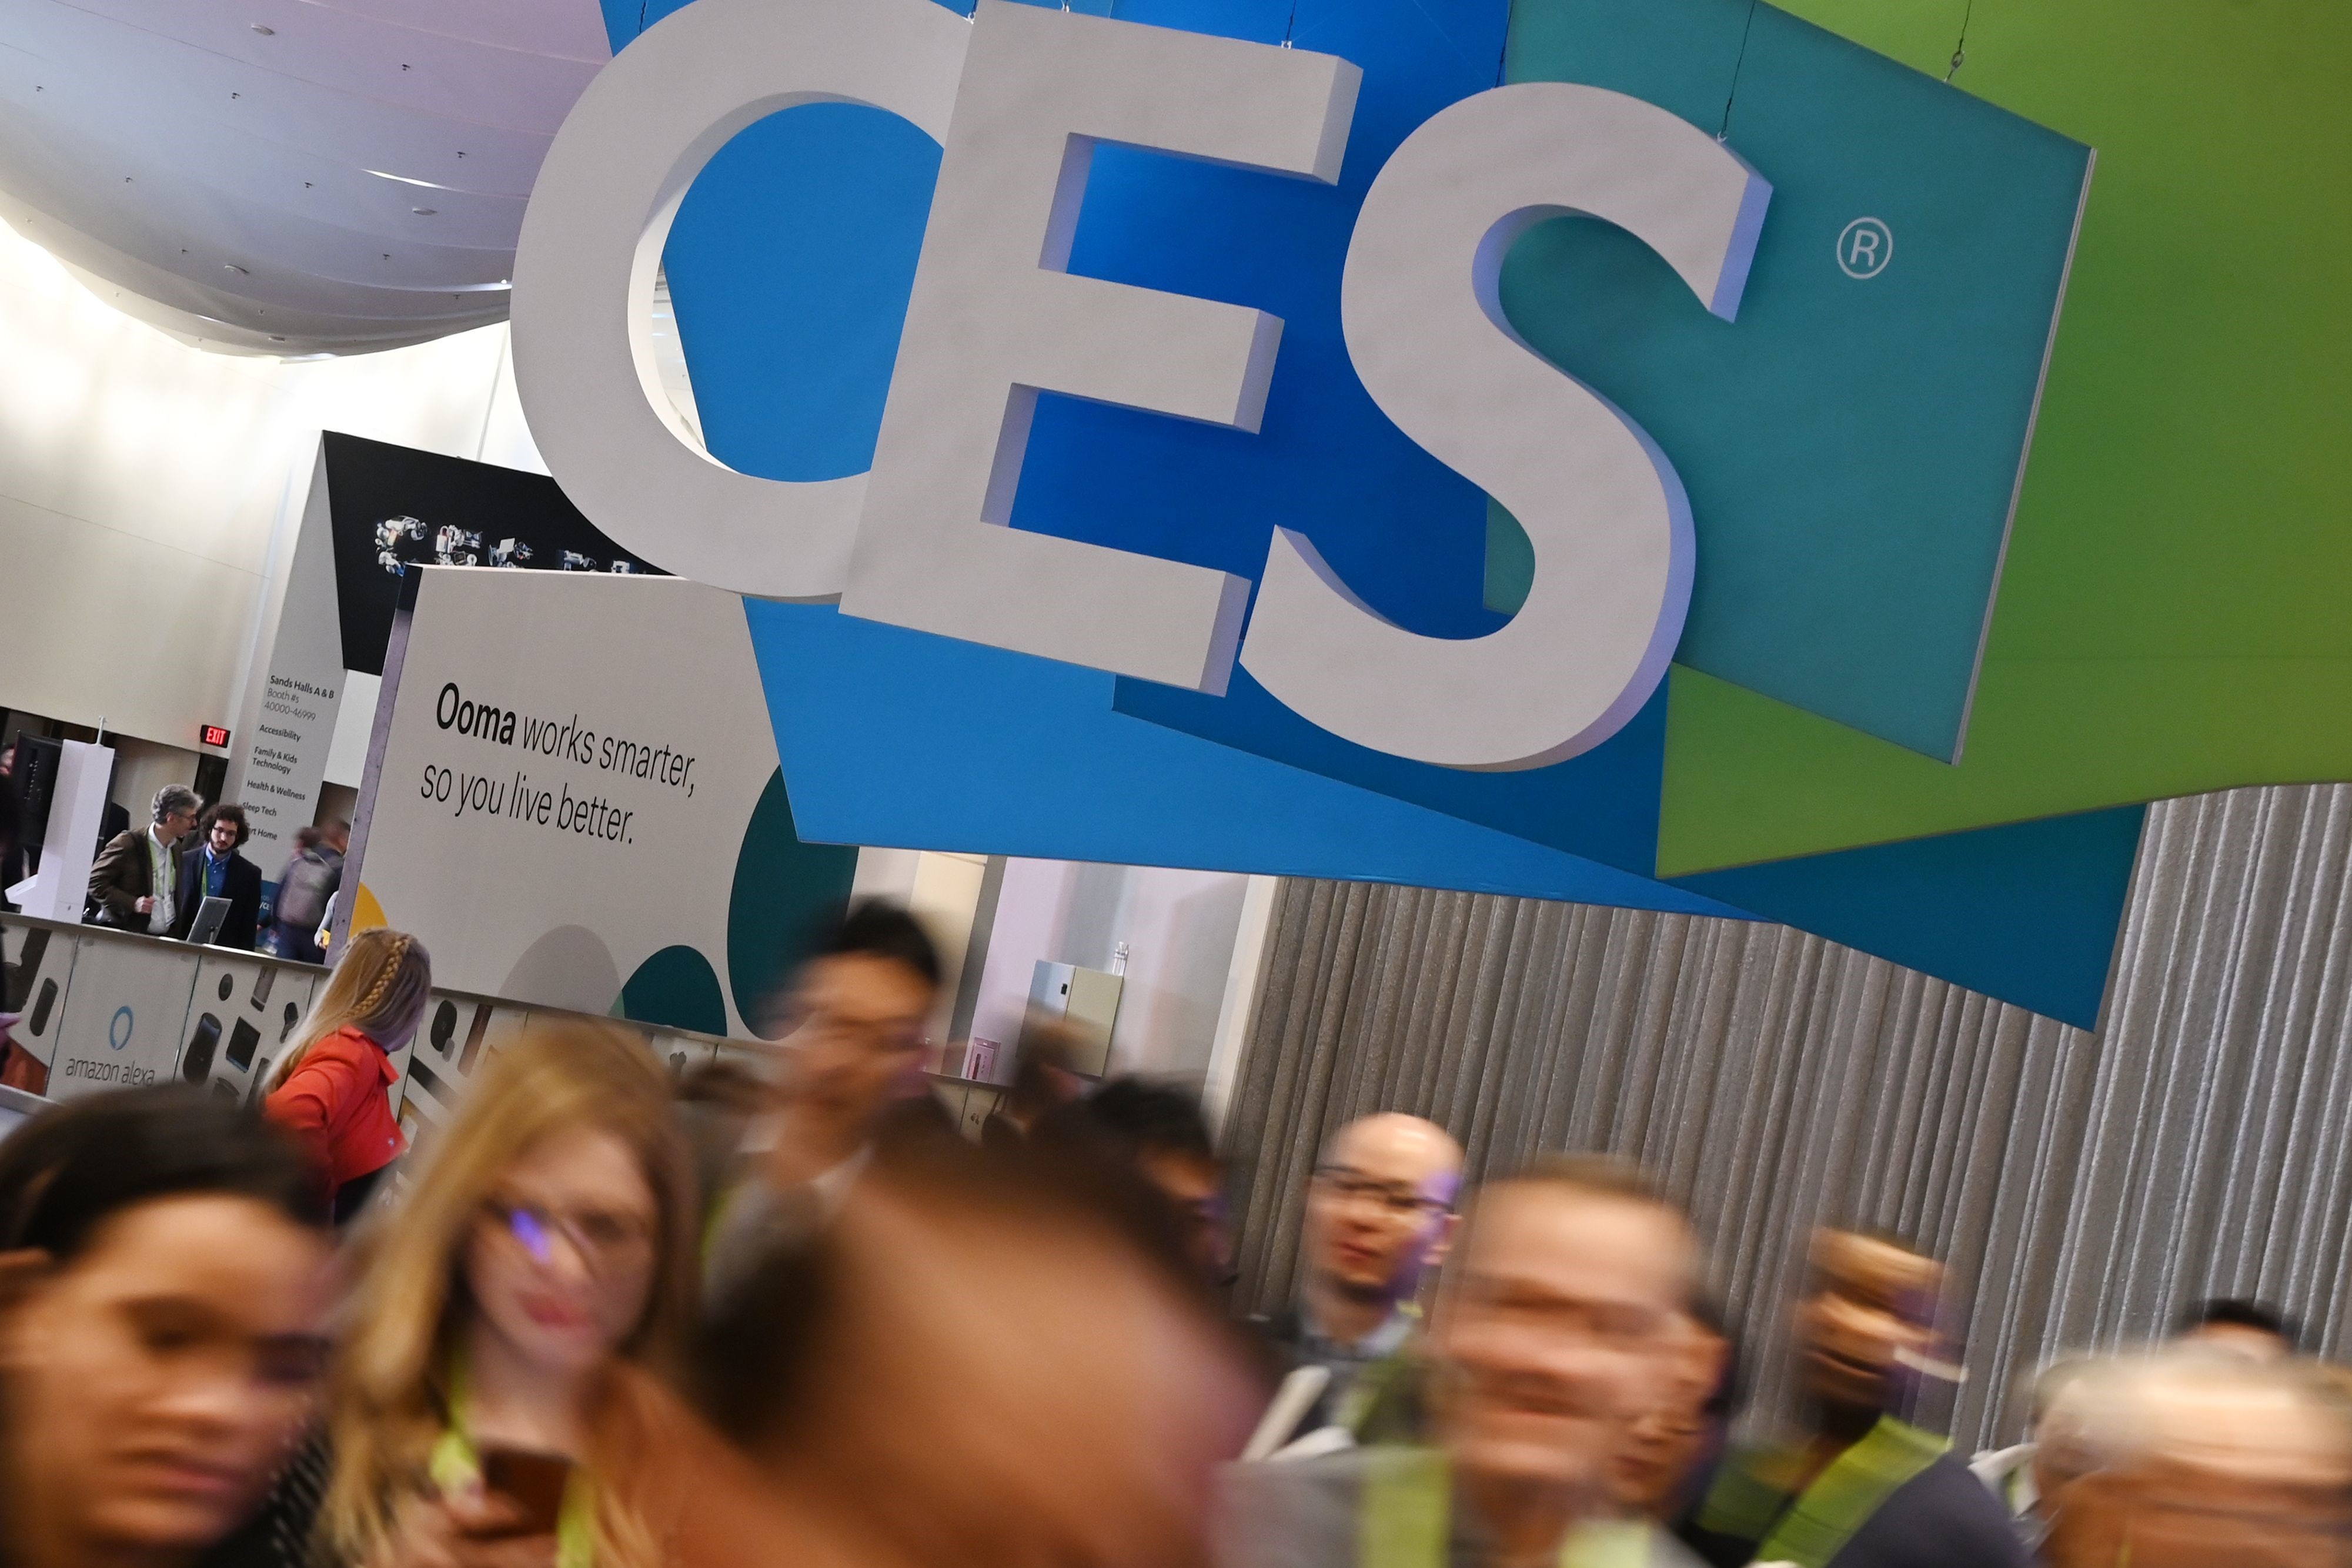 The show floor at CES